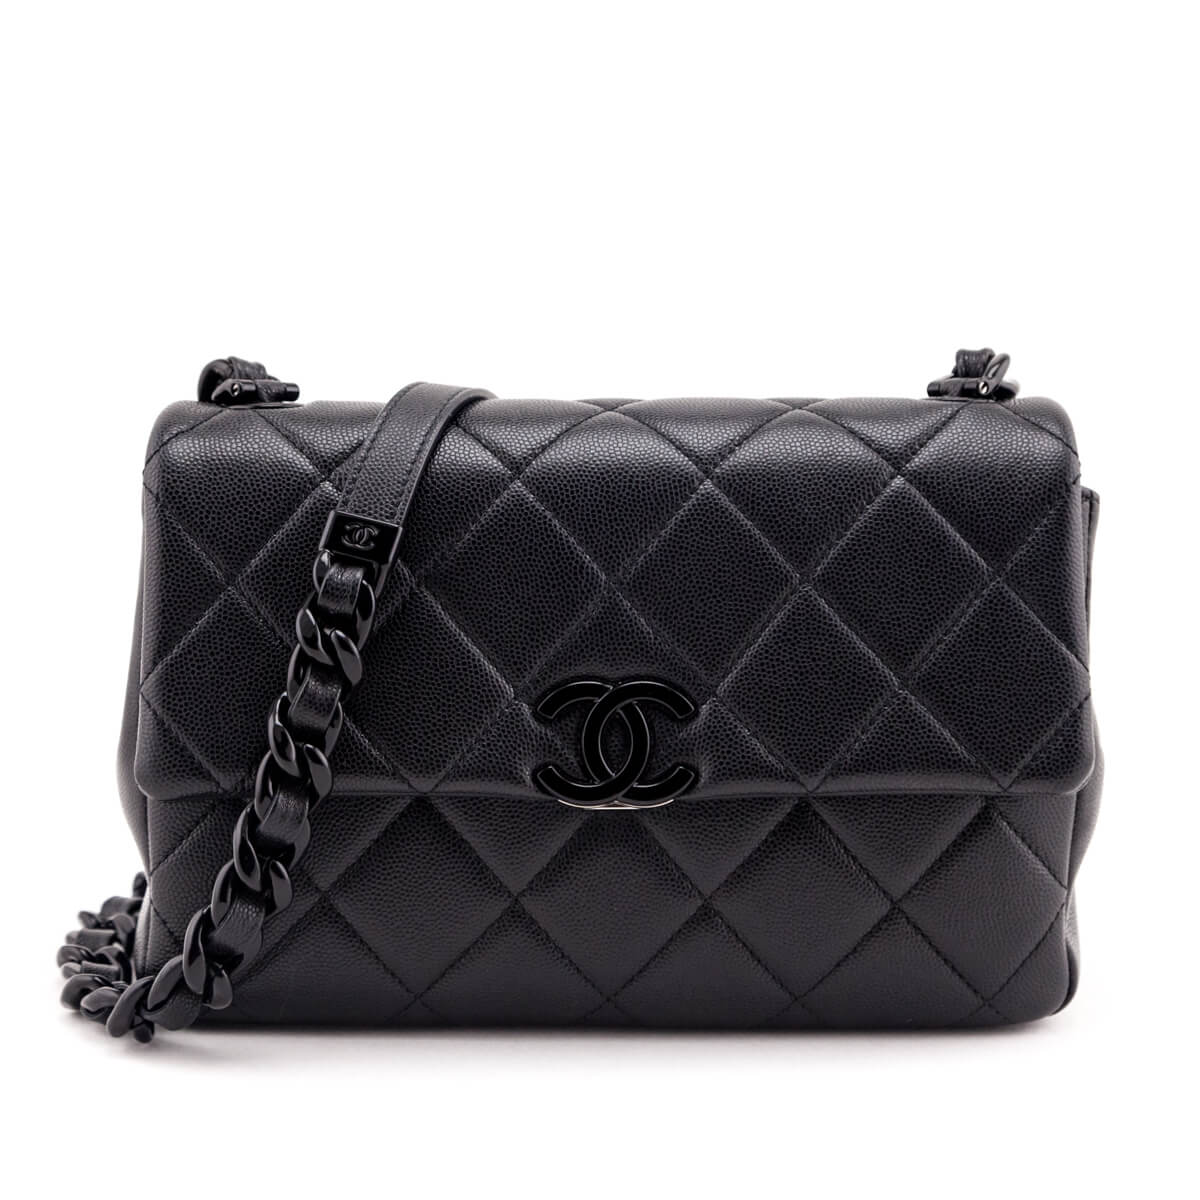 Chanel Black Quilted Grained Calfskin My Everything Flap Bag - Love that Bag etc - Preowned Authentic Designer Handbags & Preloved Fashions